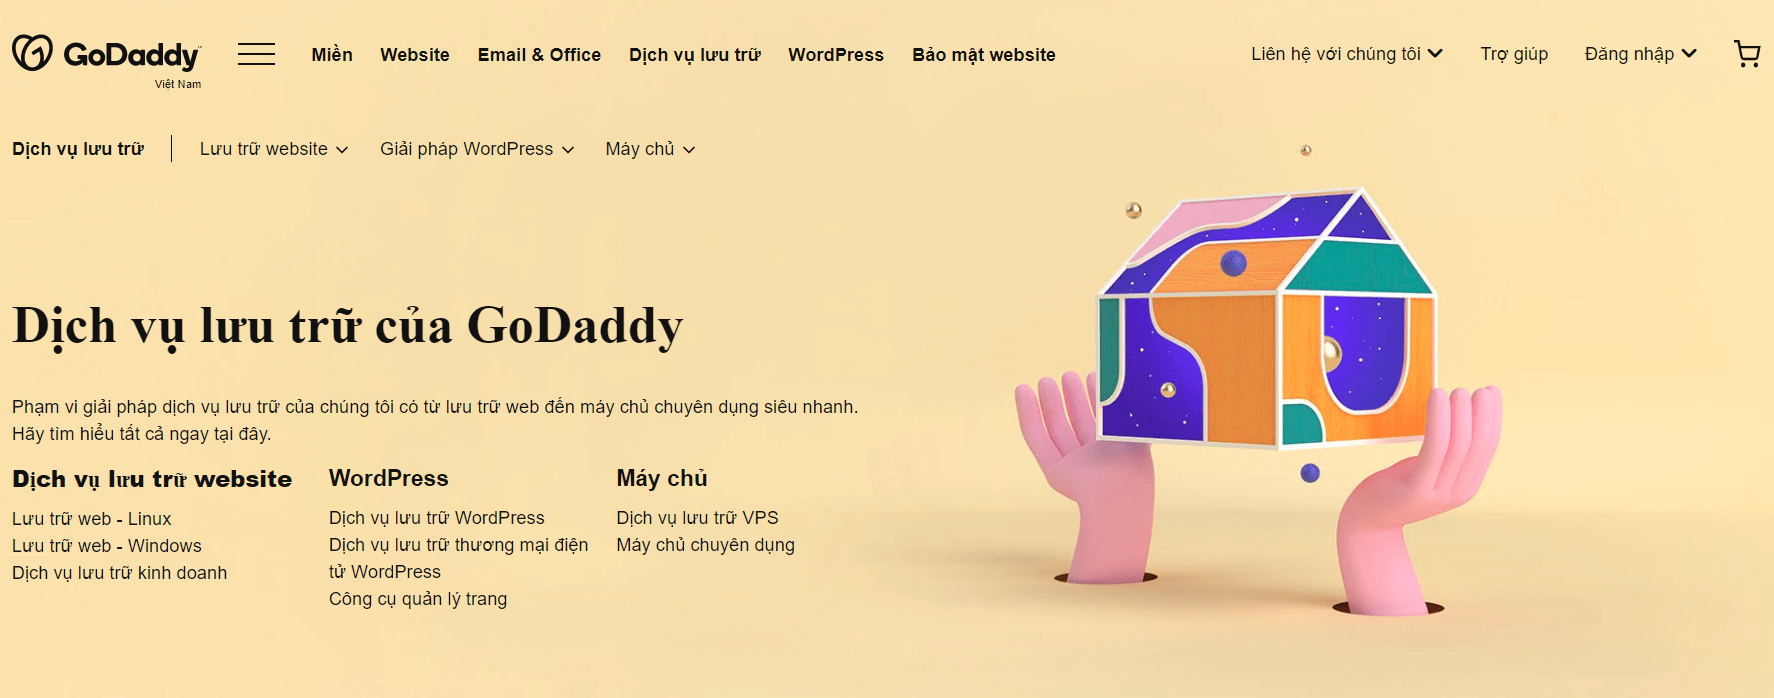 the GoDaddy home page